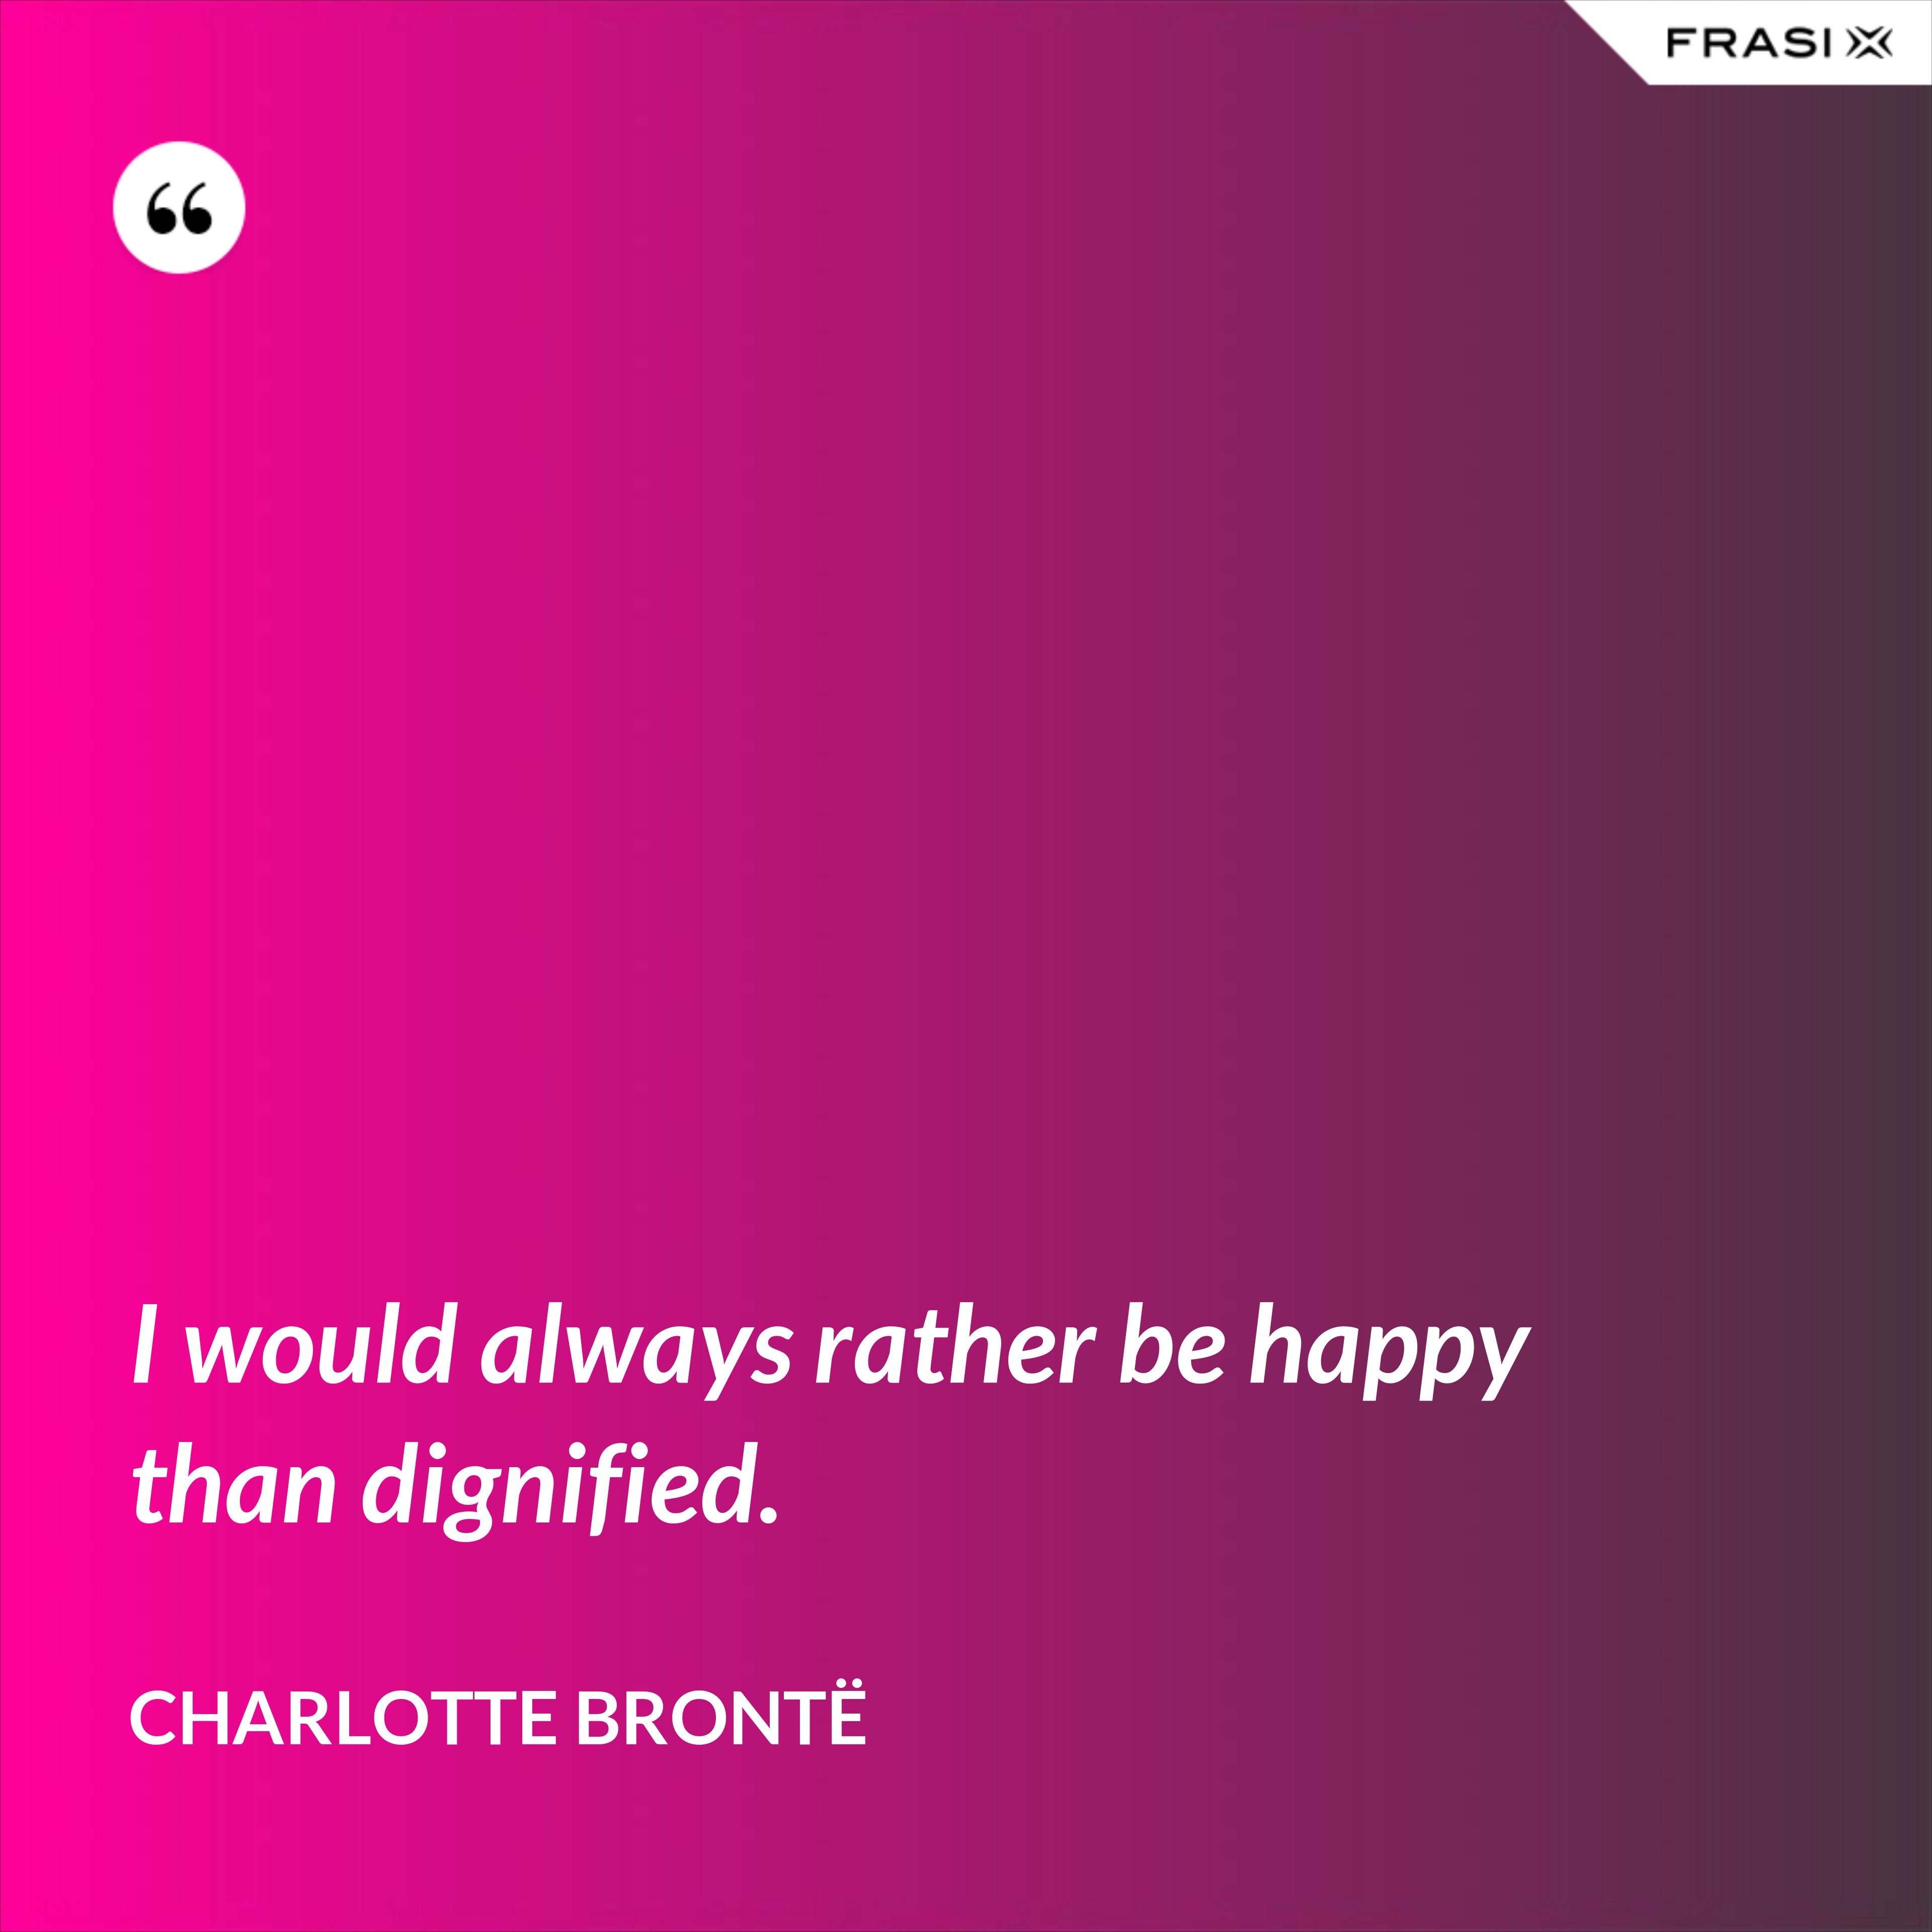 I would always rather be happy than dignified. - Charlotte Brontë